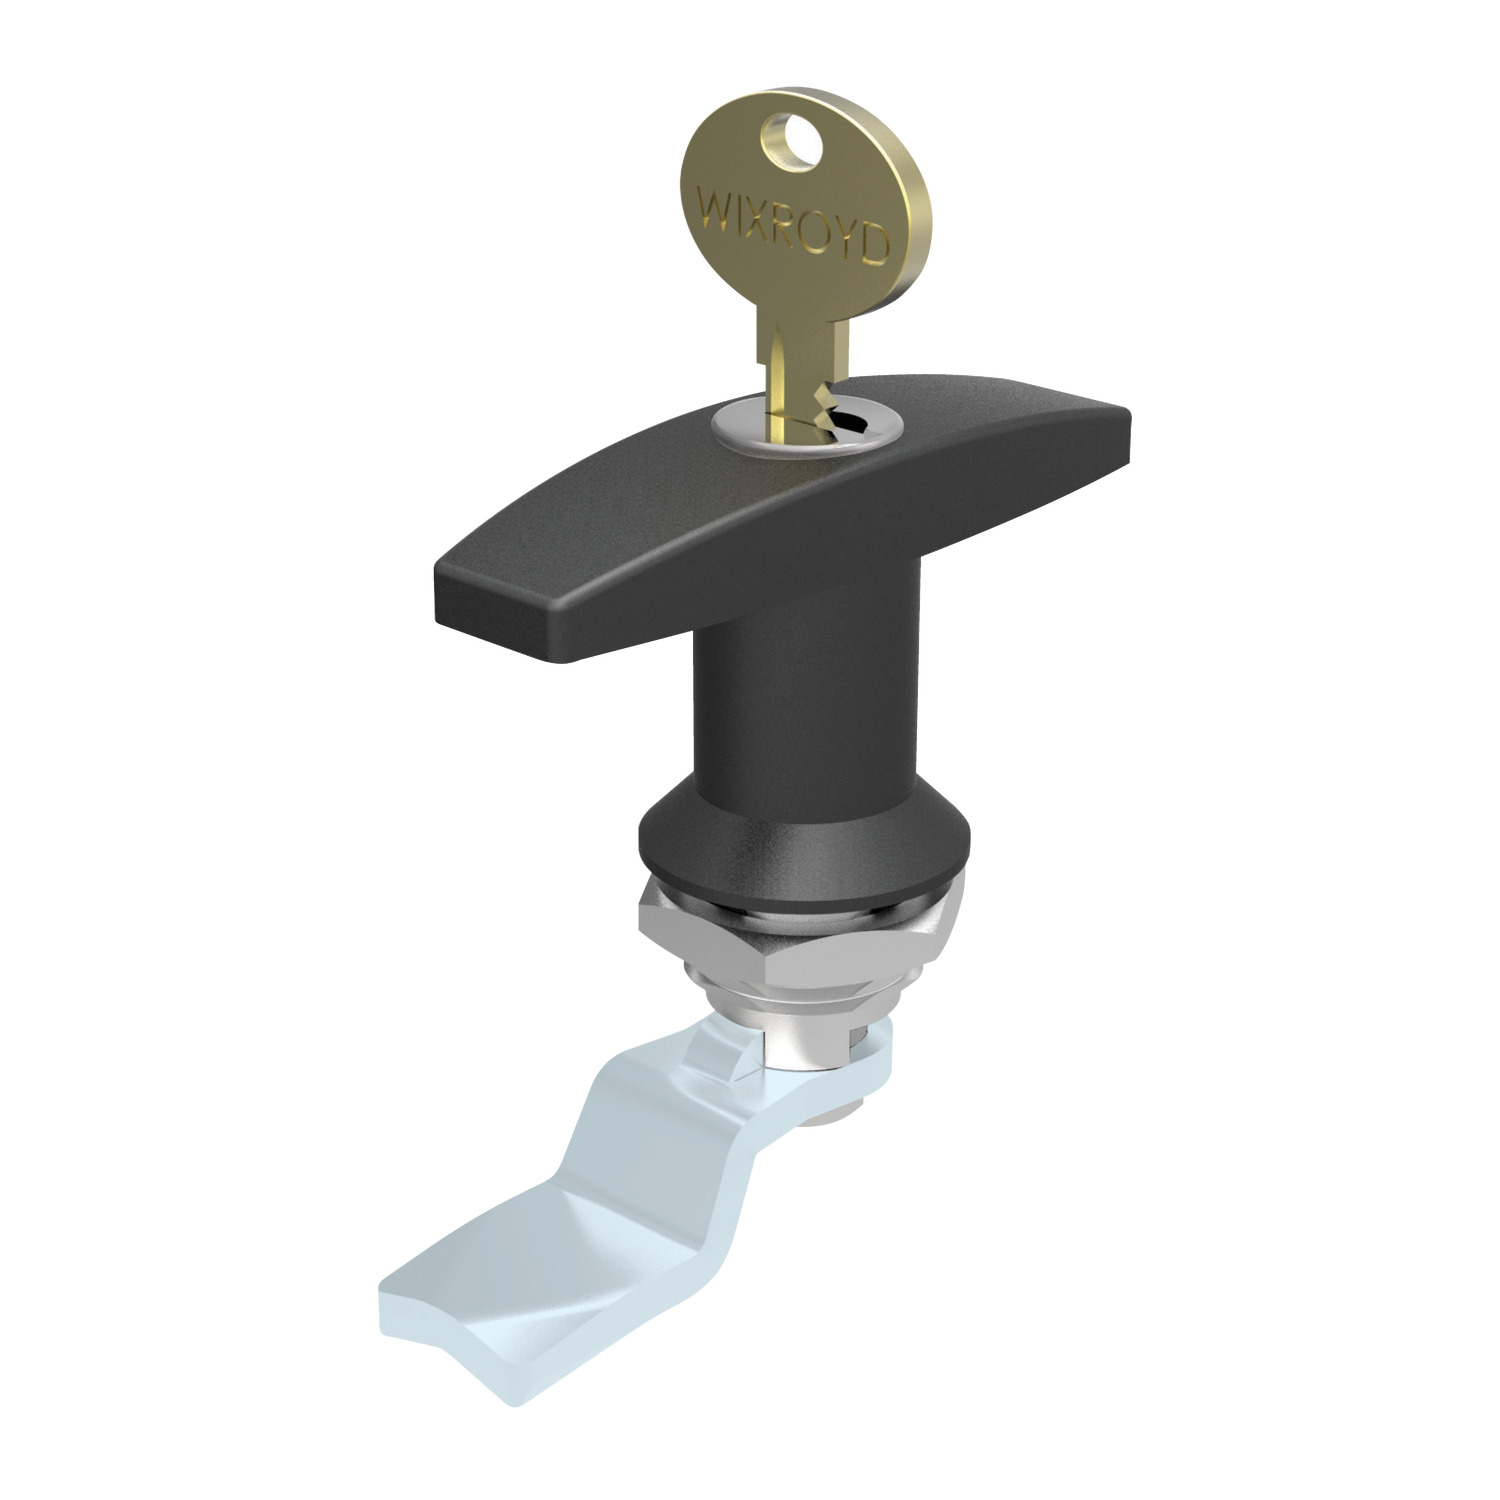 Cam Locks - Flexi-System T handle cam lock. Available in Keyed alike and Keyed to differ. Chrome or black coated.